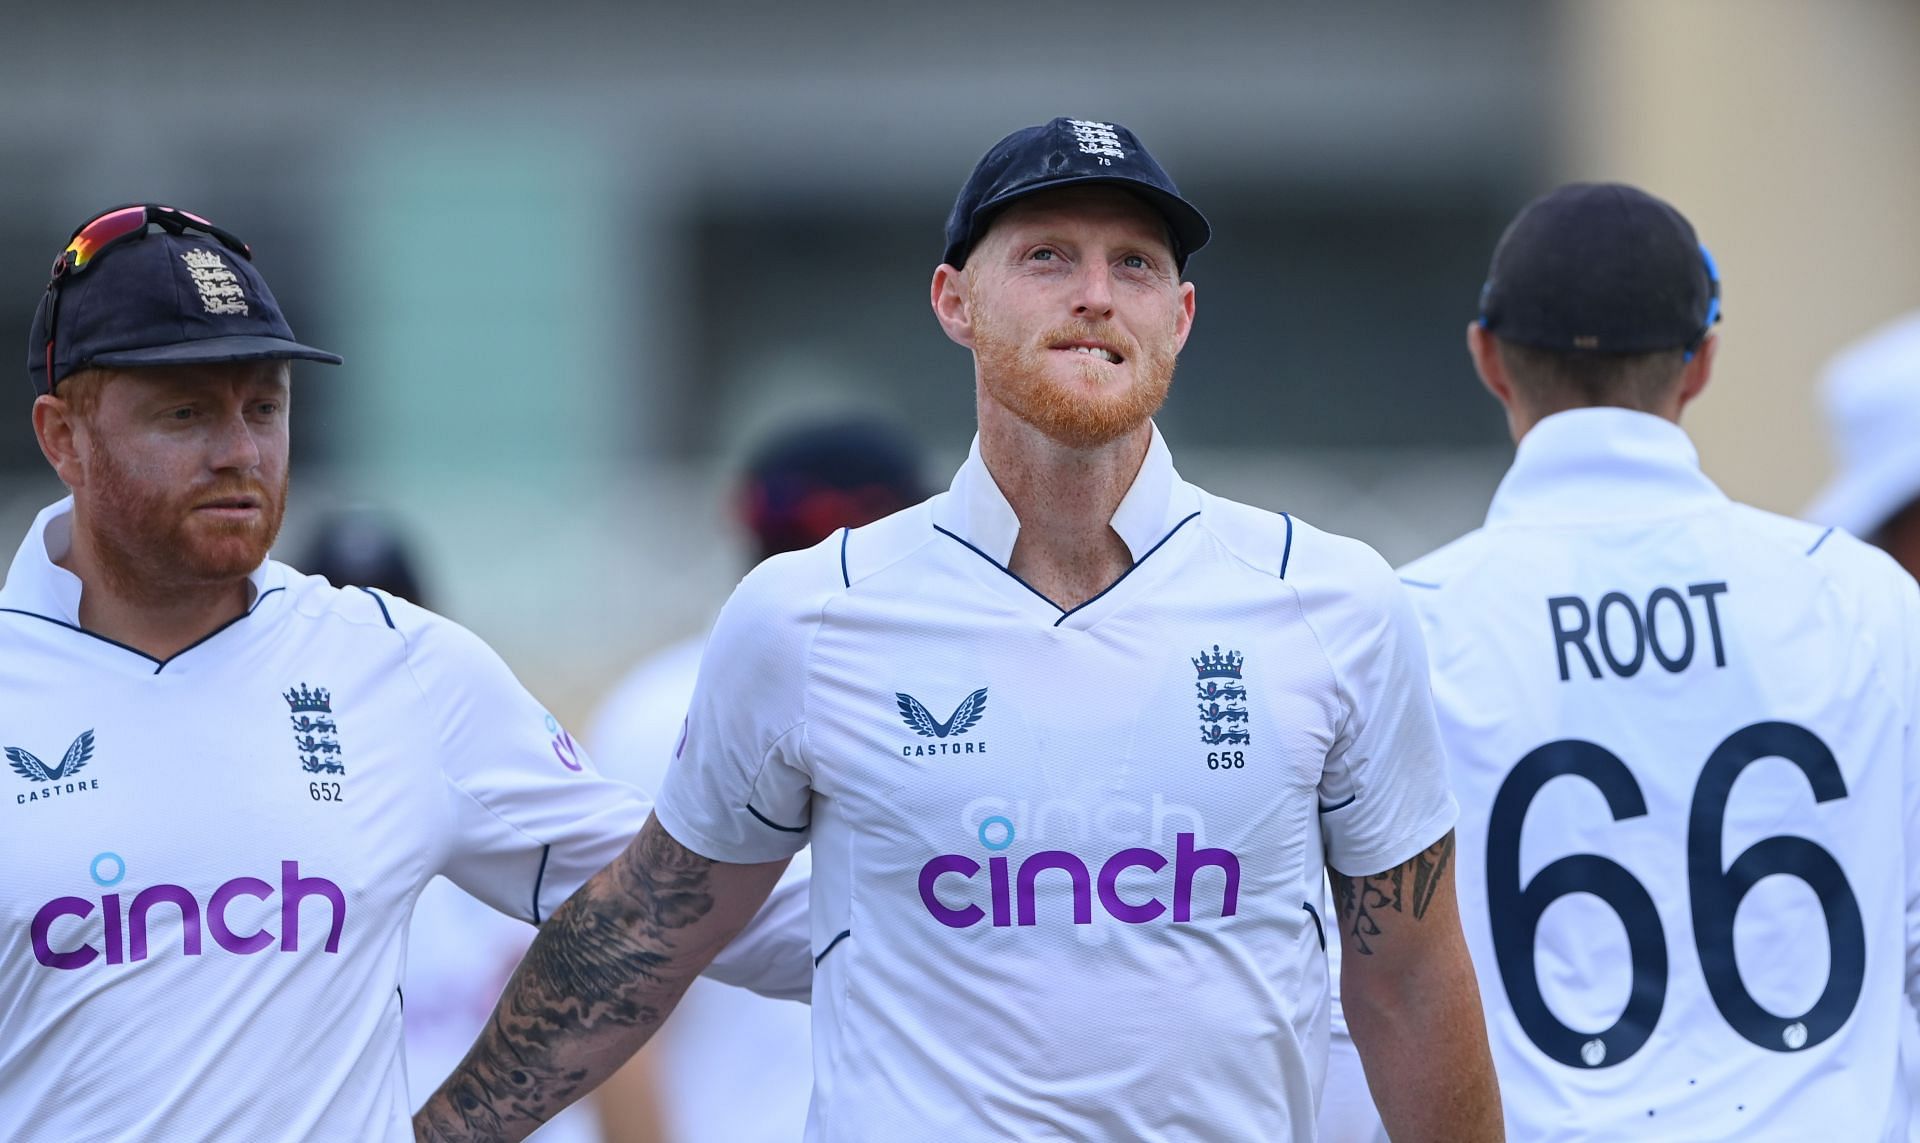 England secured an emphatic victory at Trent Bridge (Credit: Getty Images)